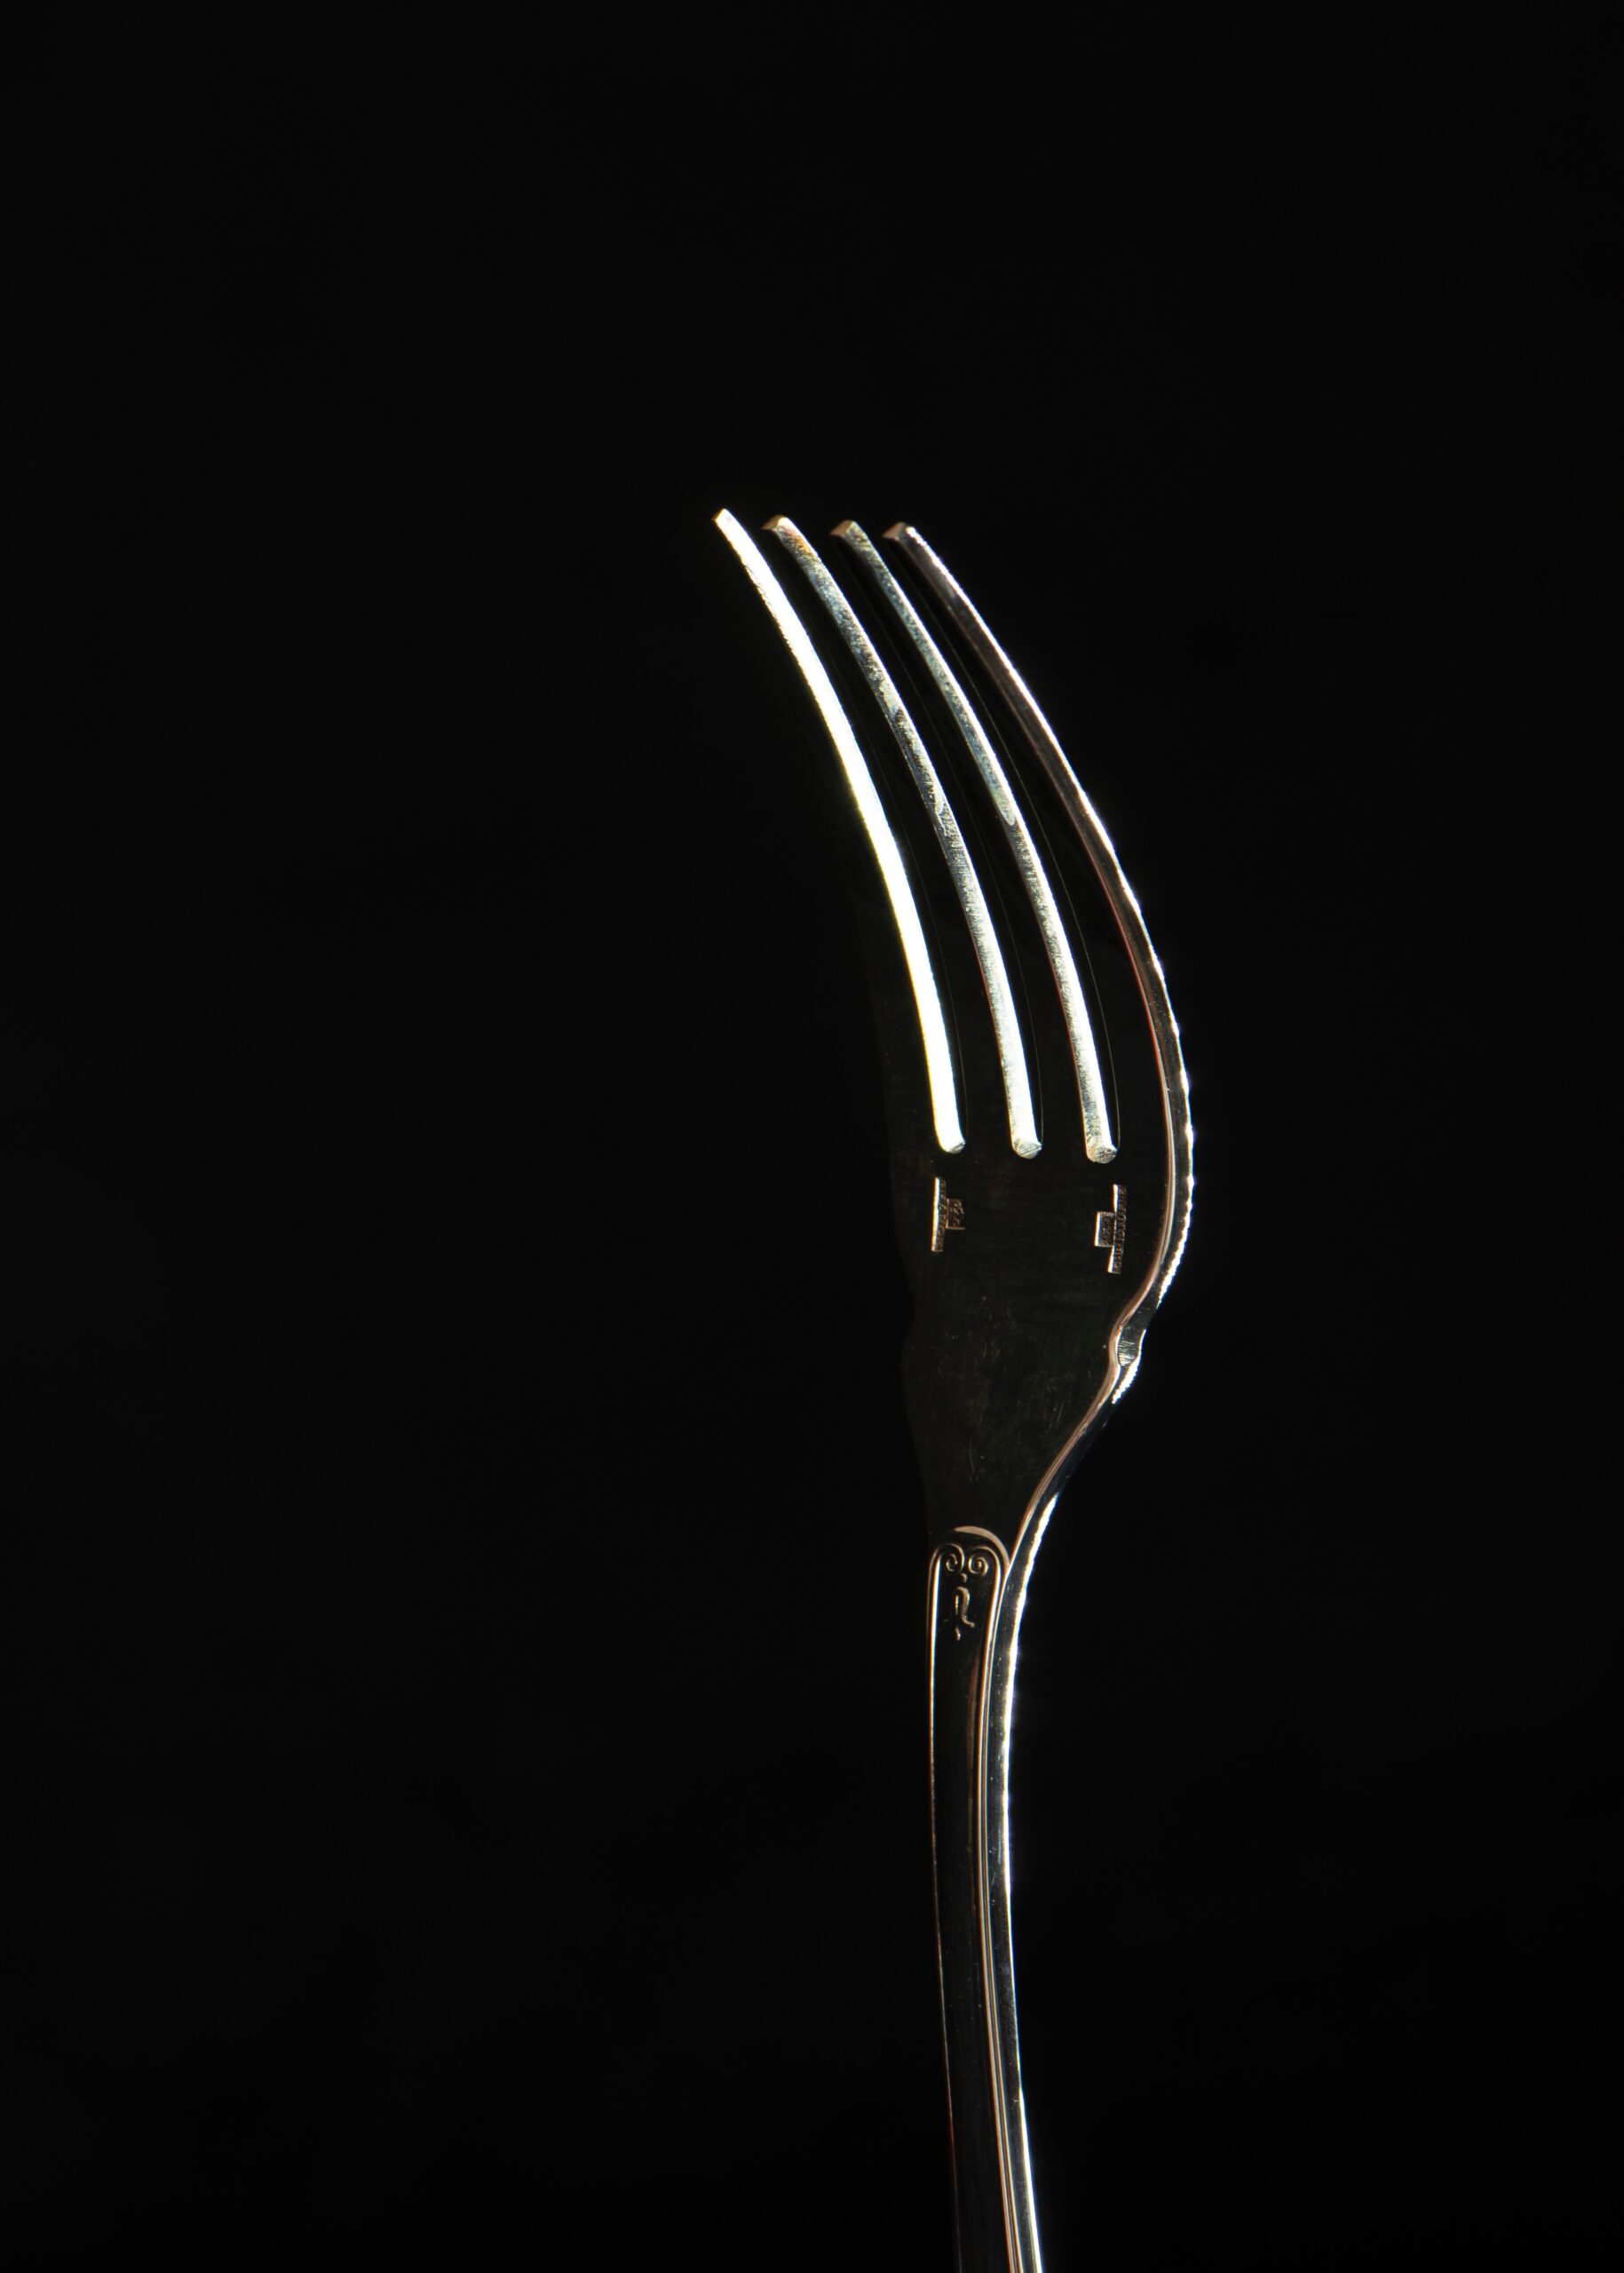 A picture of a fork that explains how to communicate effectively during holiday gatherings